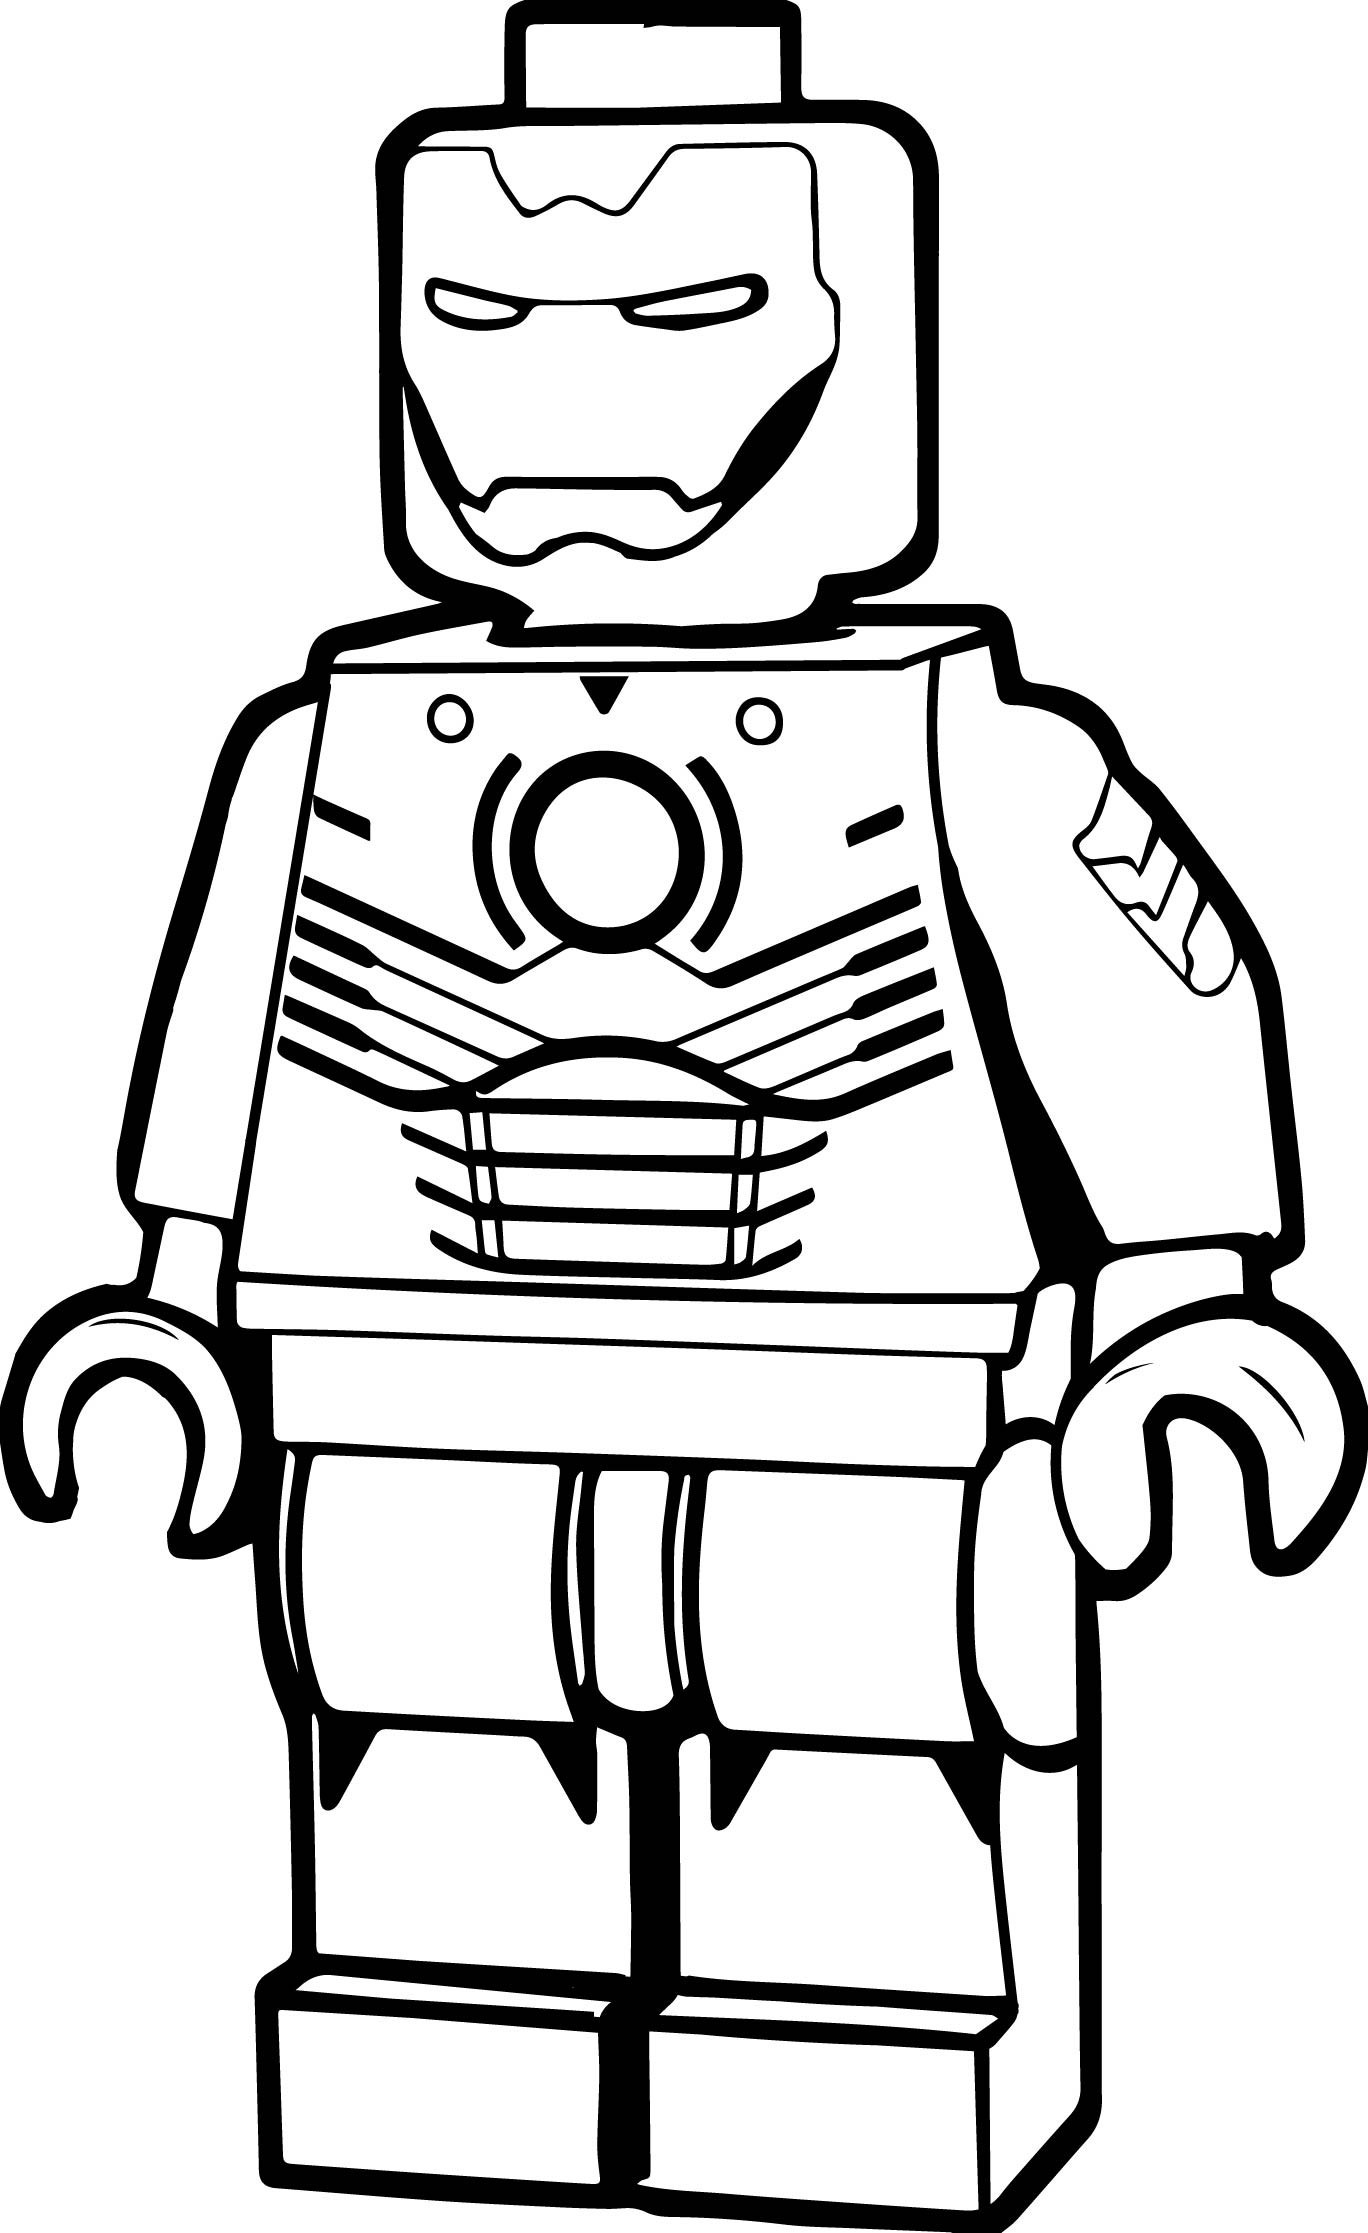 Lego People Coloring Pages at Free printable